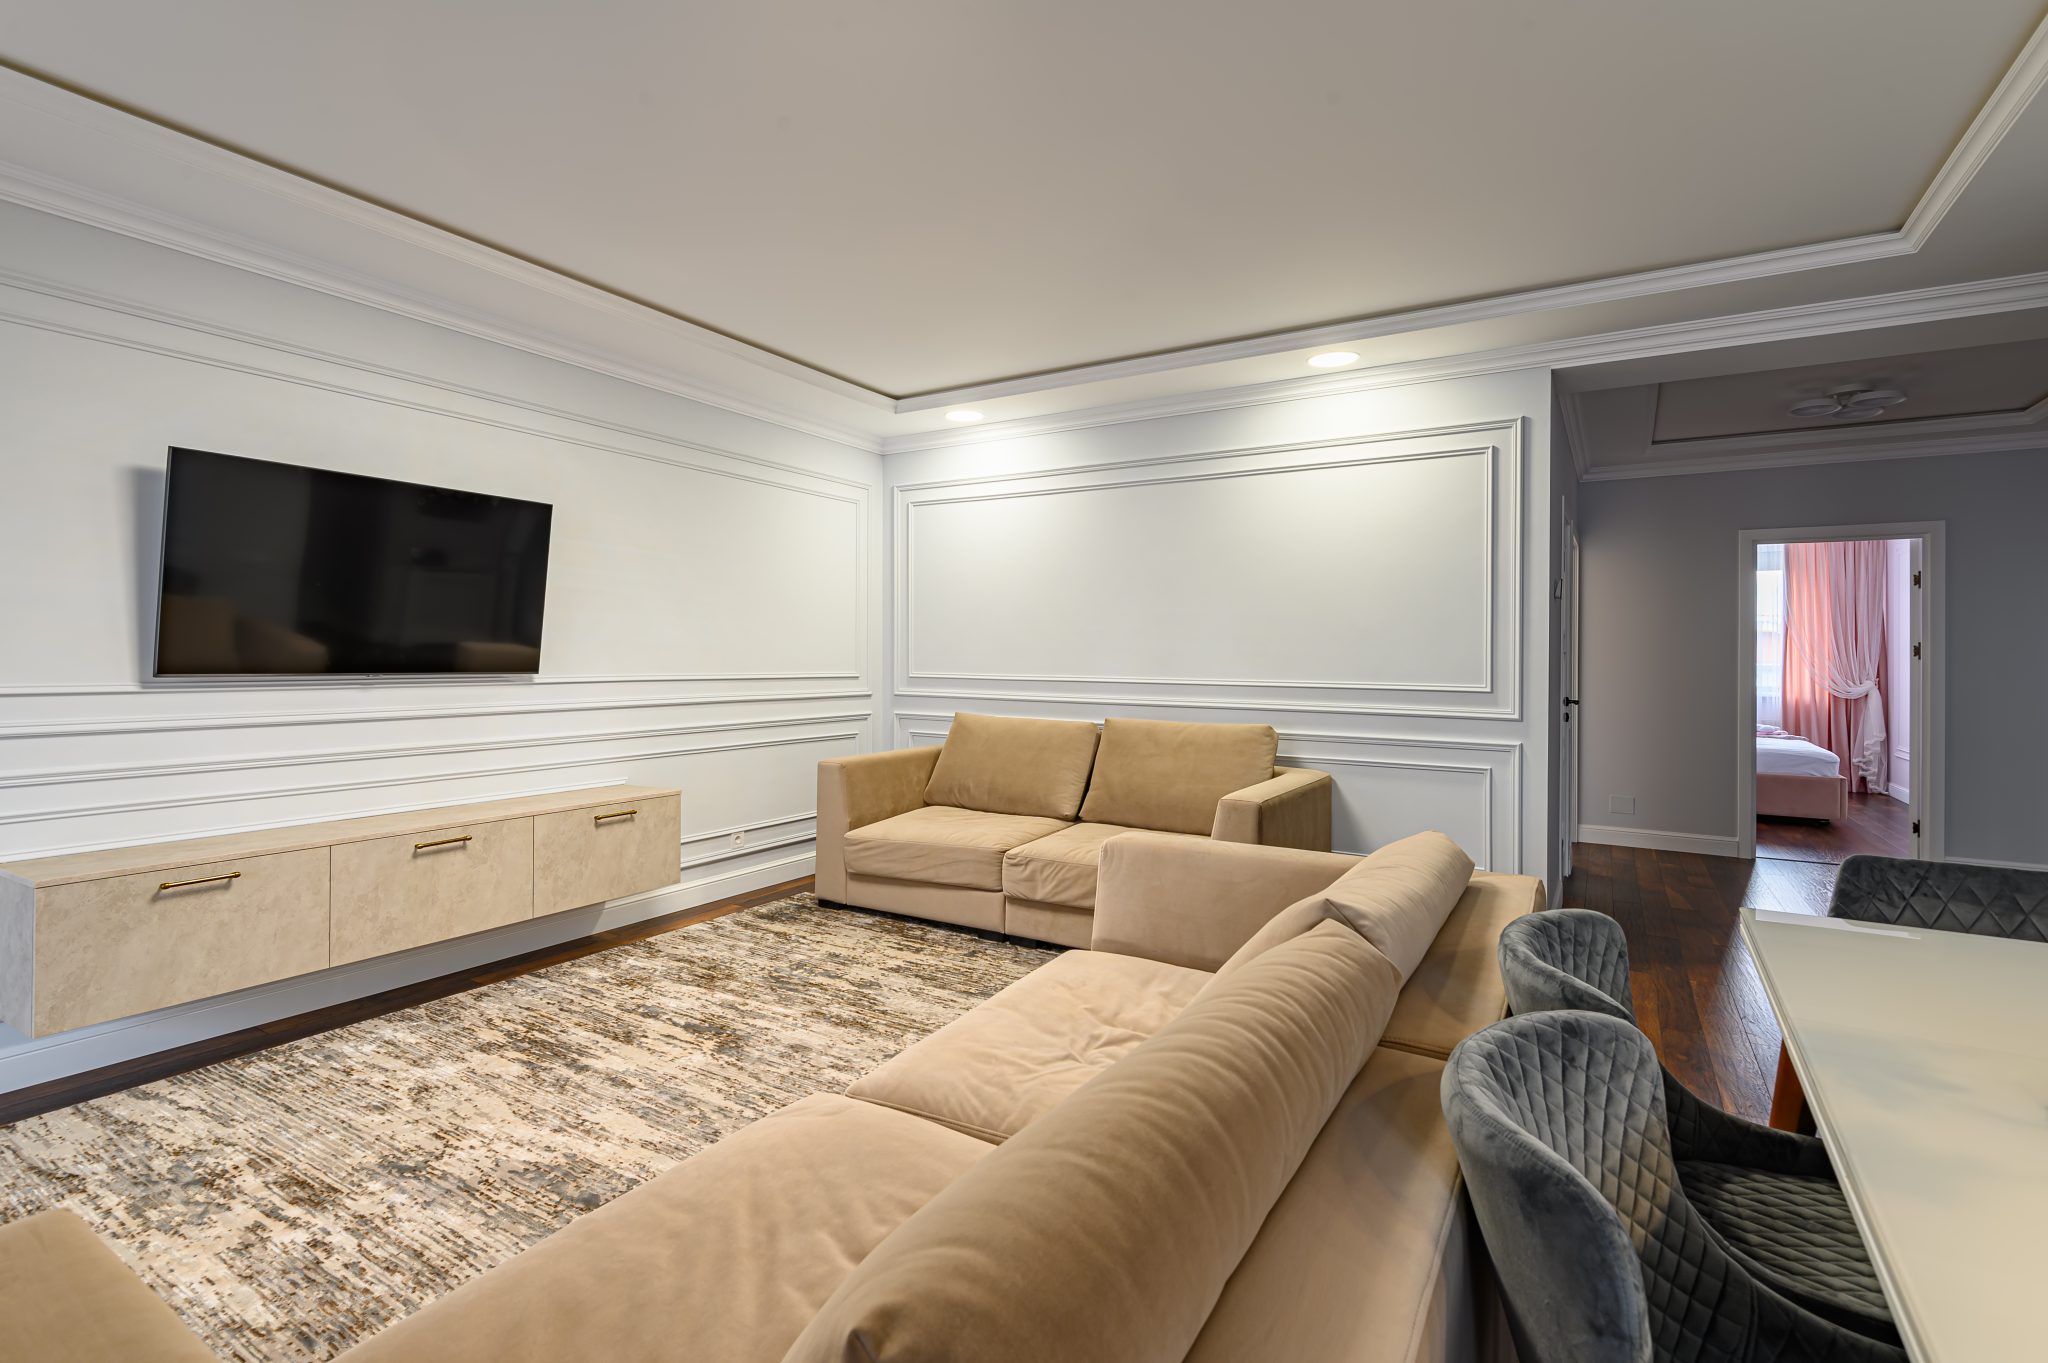 Basement living area with tv